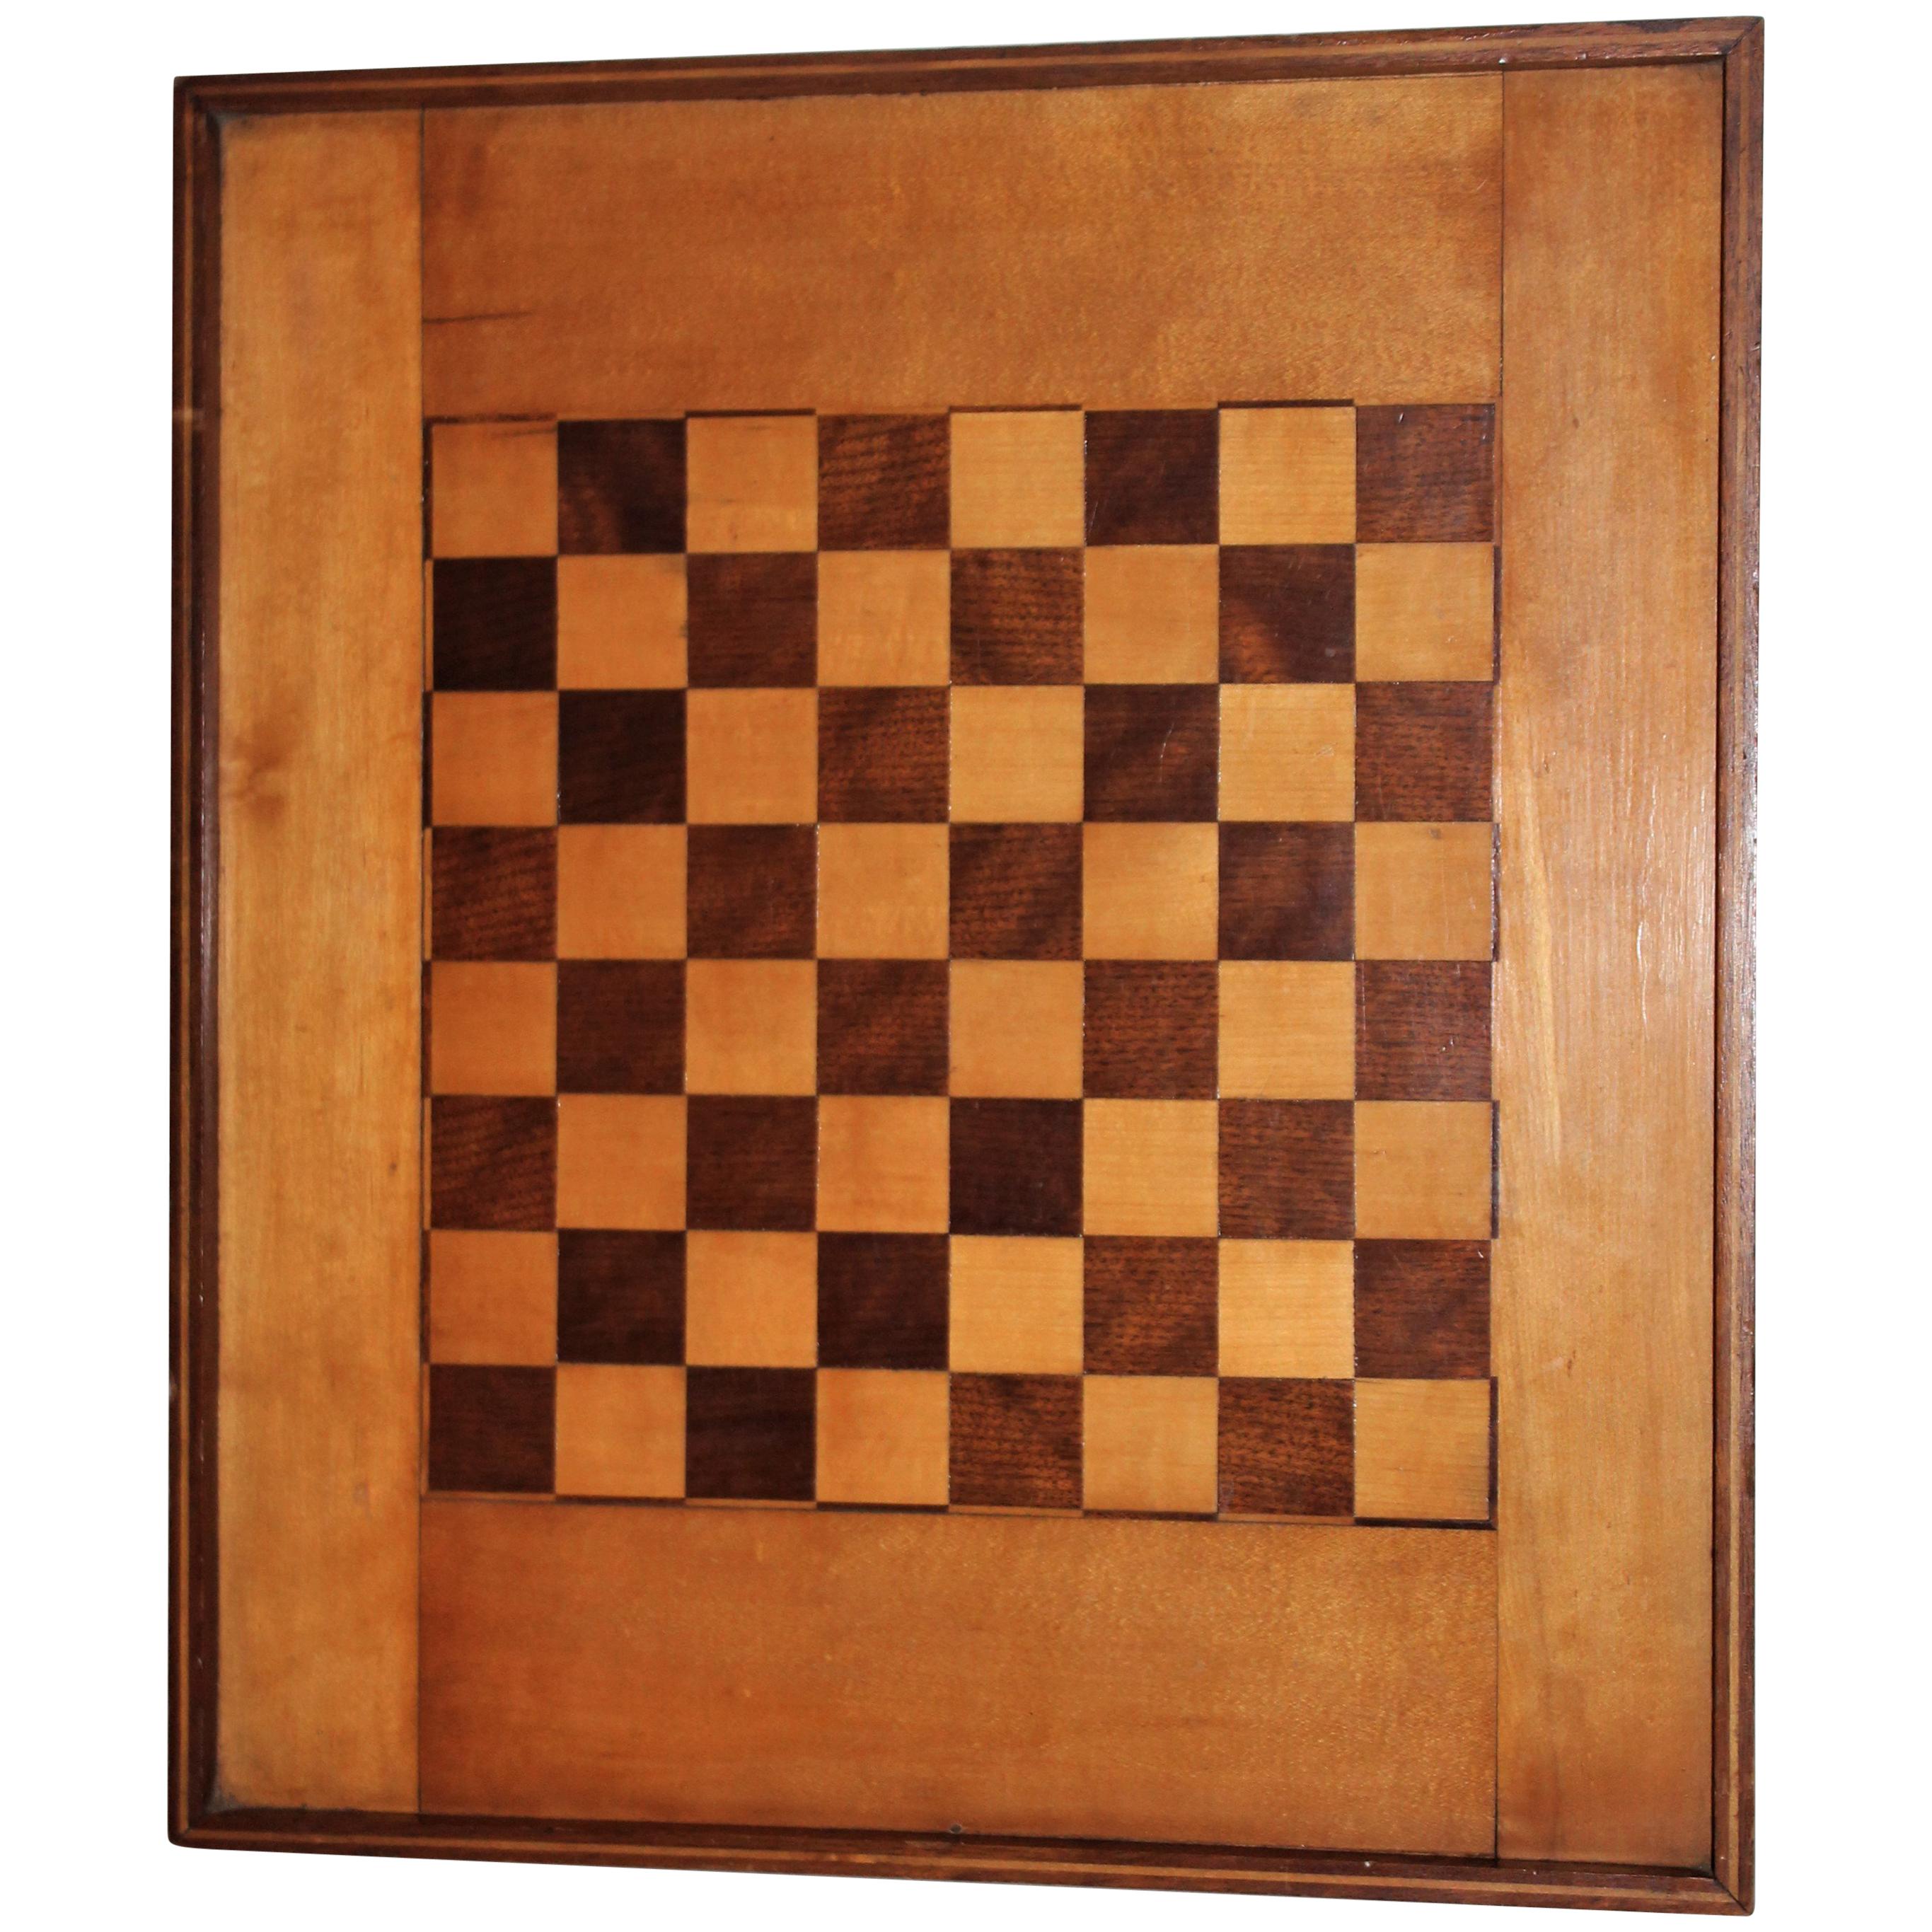 Inlaid Game Board, Oversize C. 1930